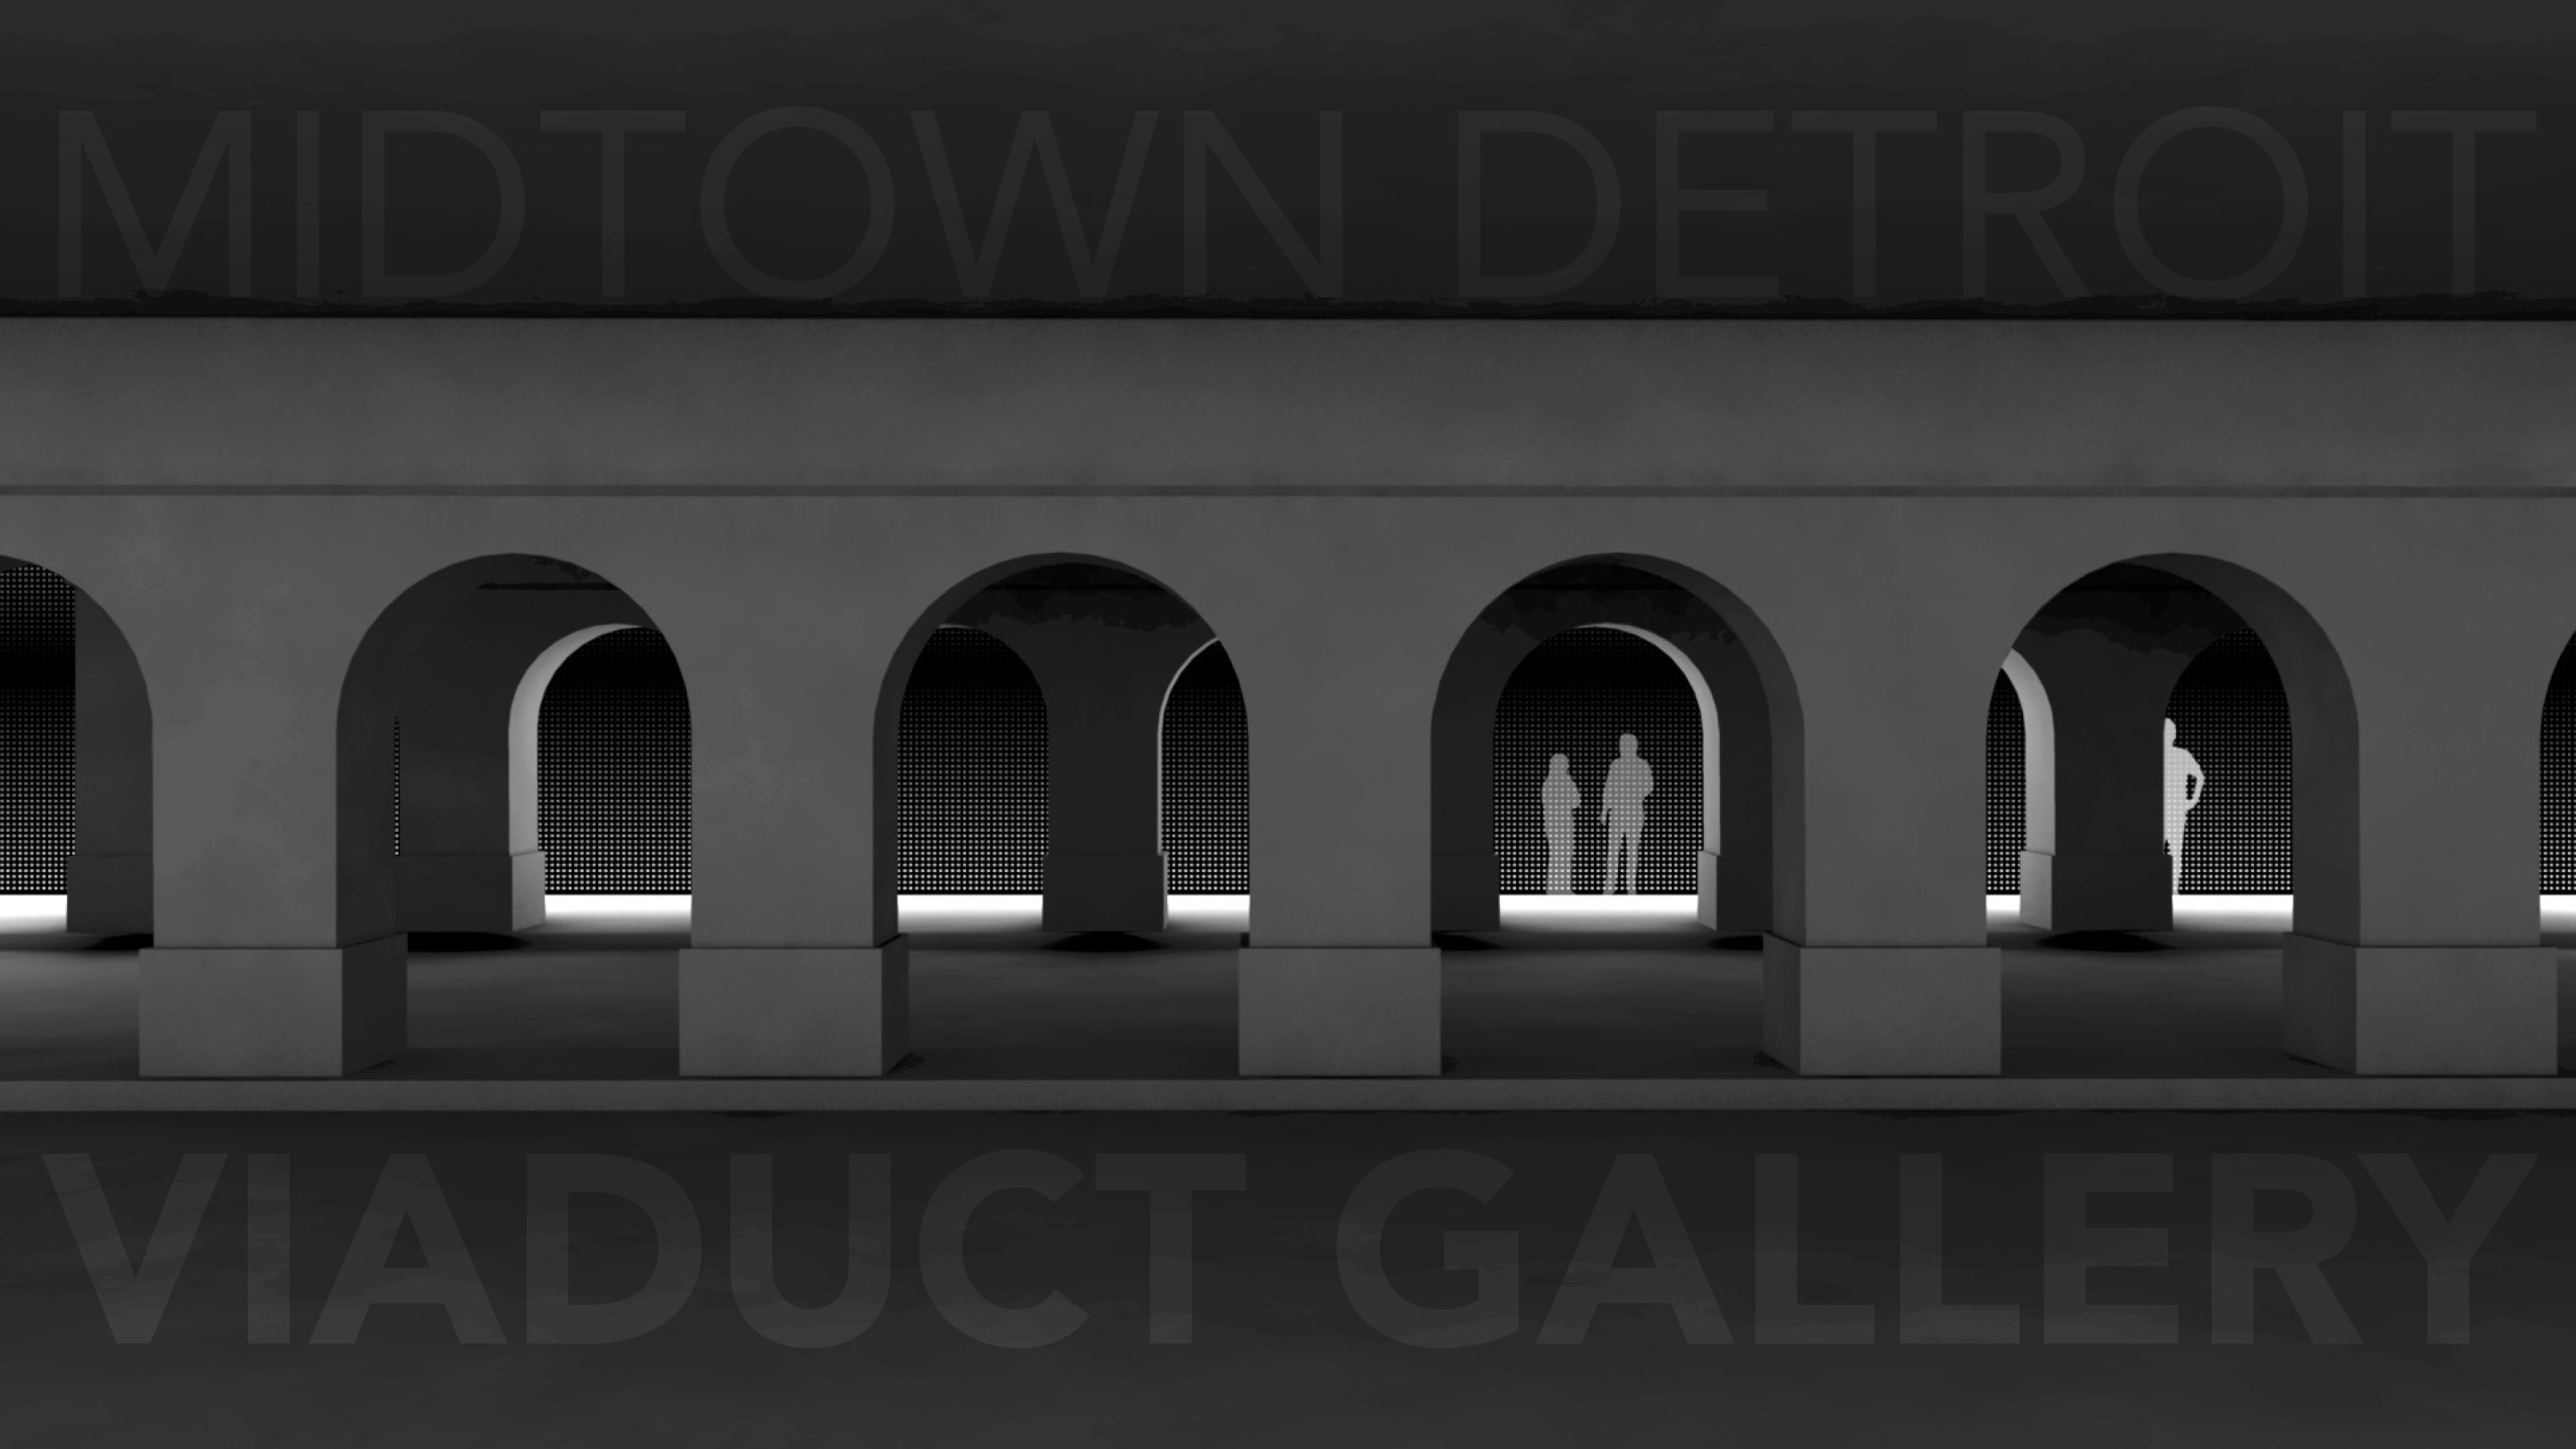 Viaduct Gallery